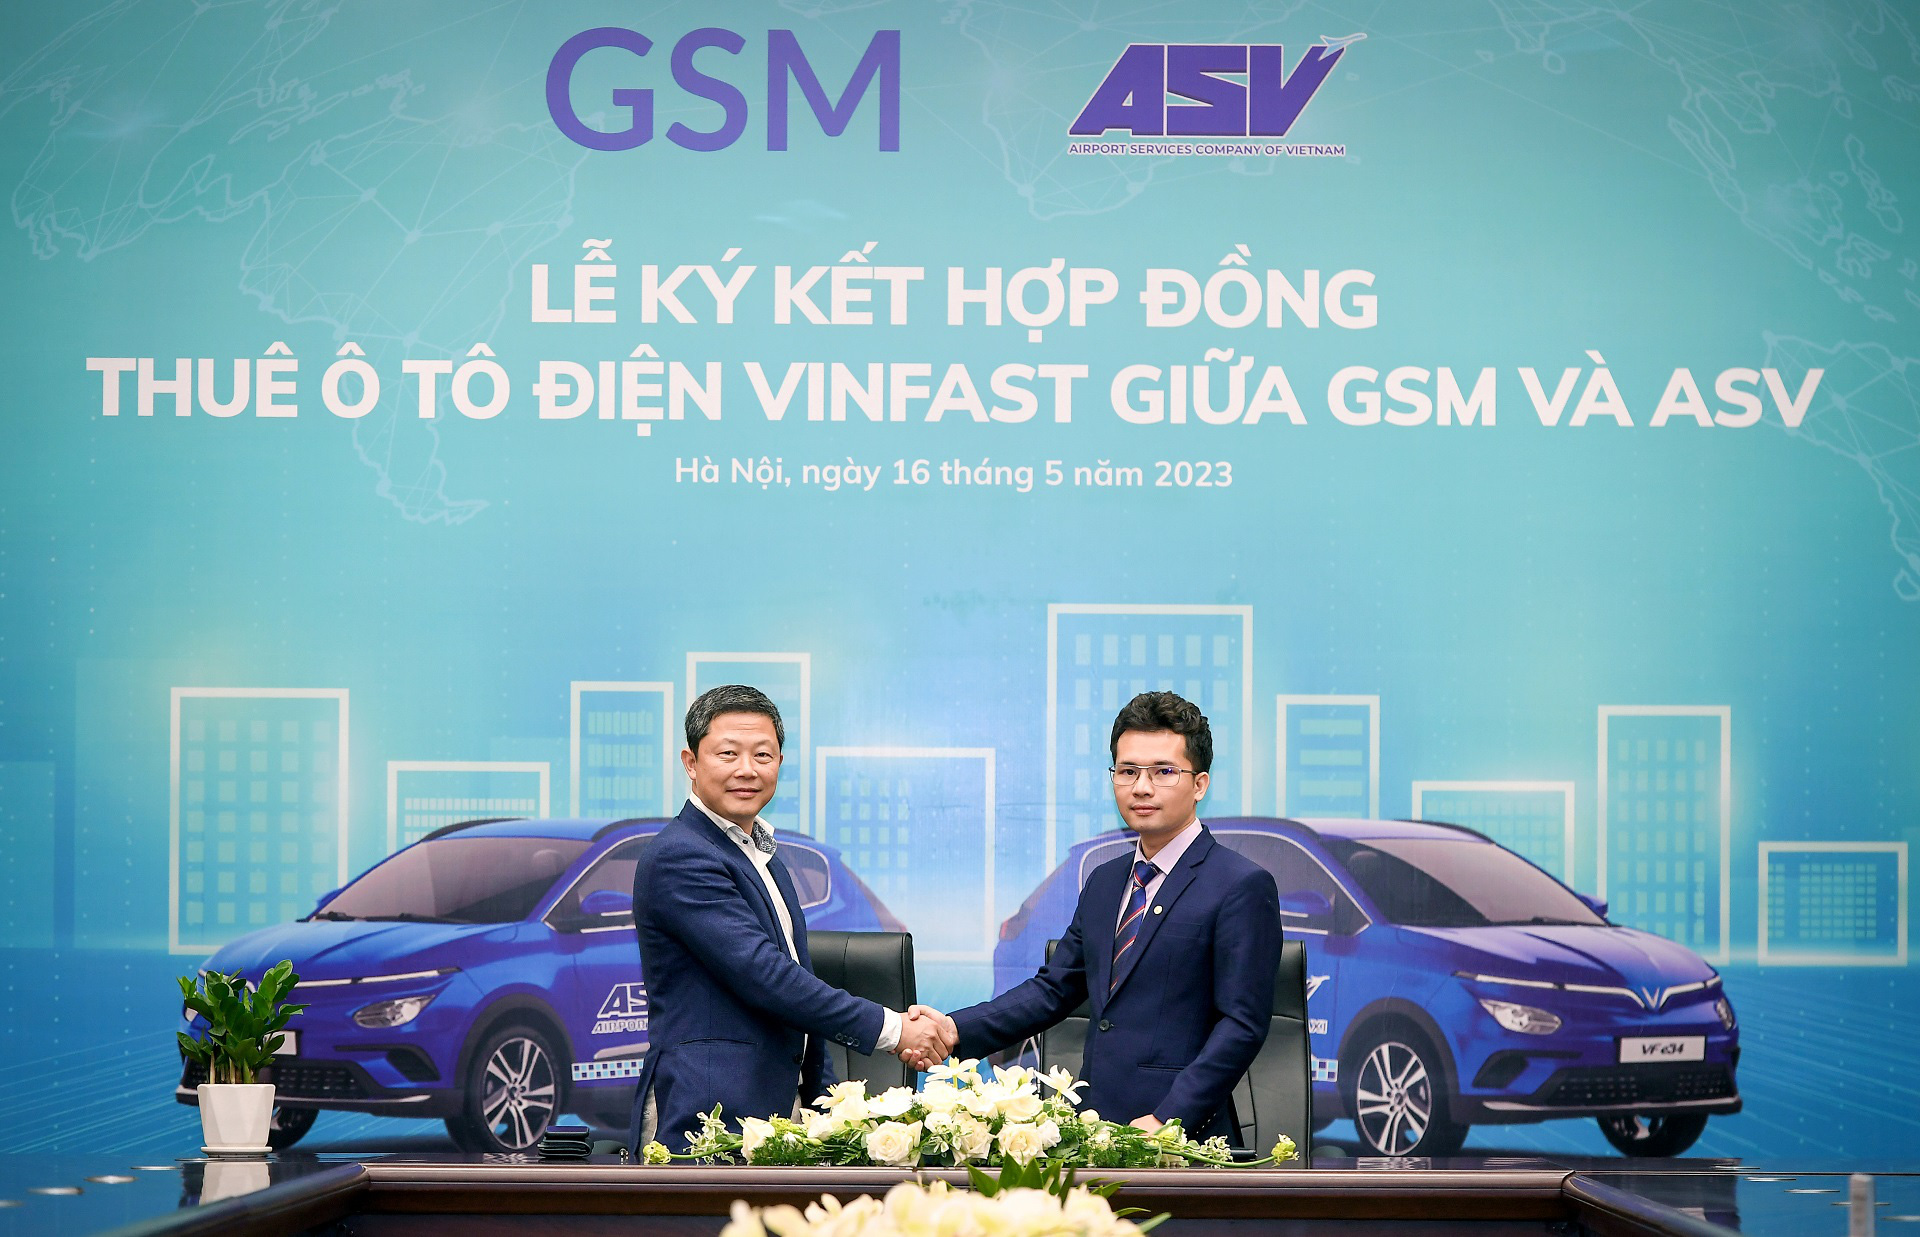 Vietnam’s Vingroup subsidiary leases 500 VinFast EVs to airport taxi firm